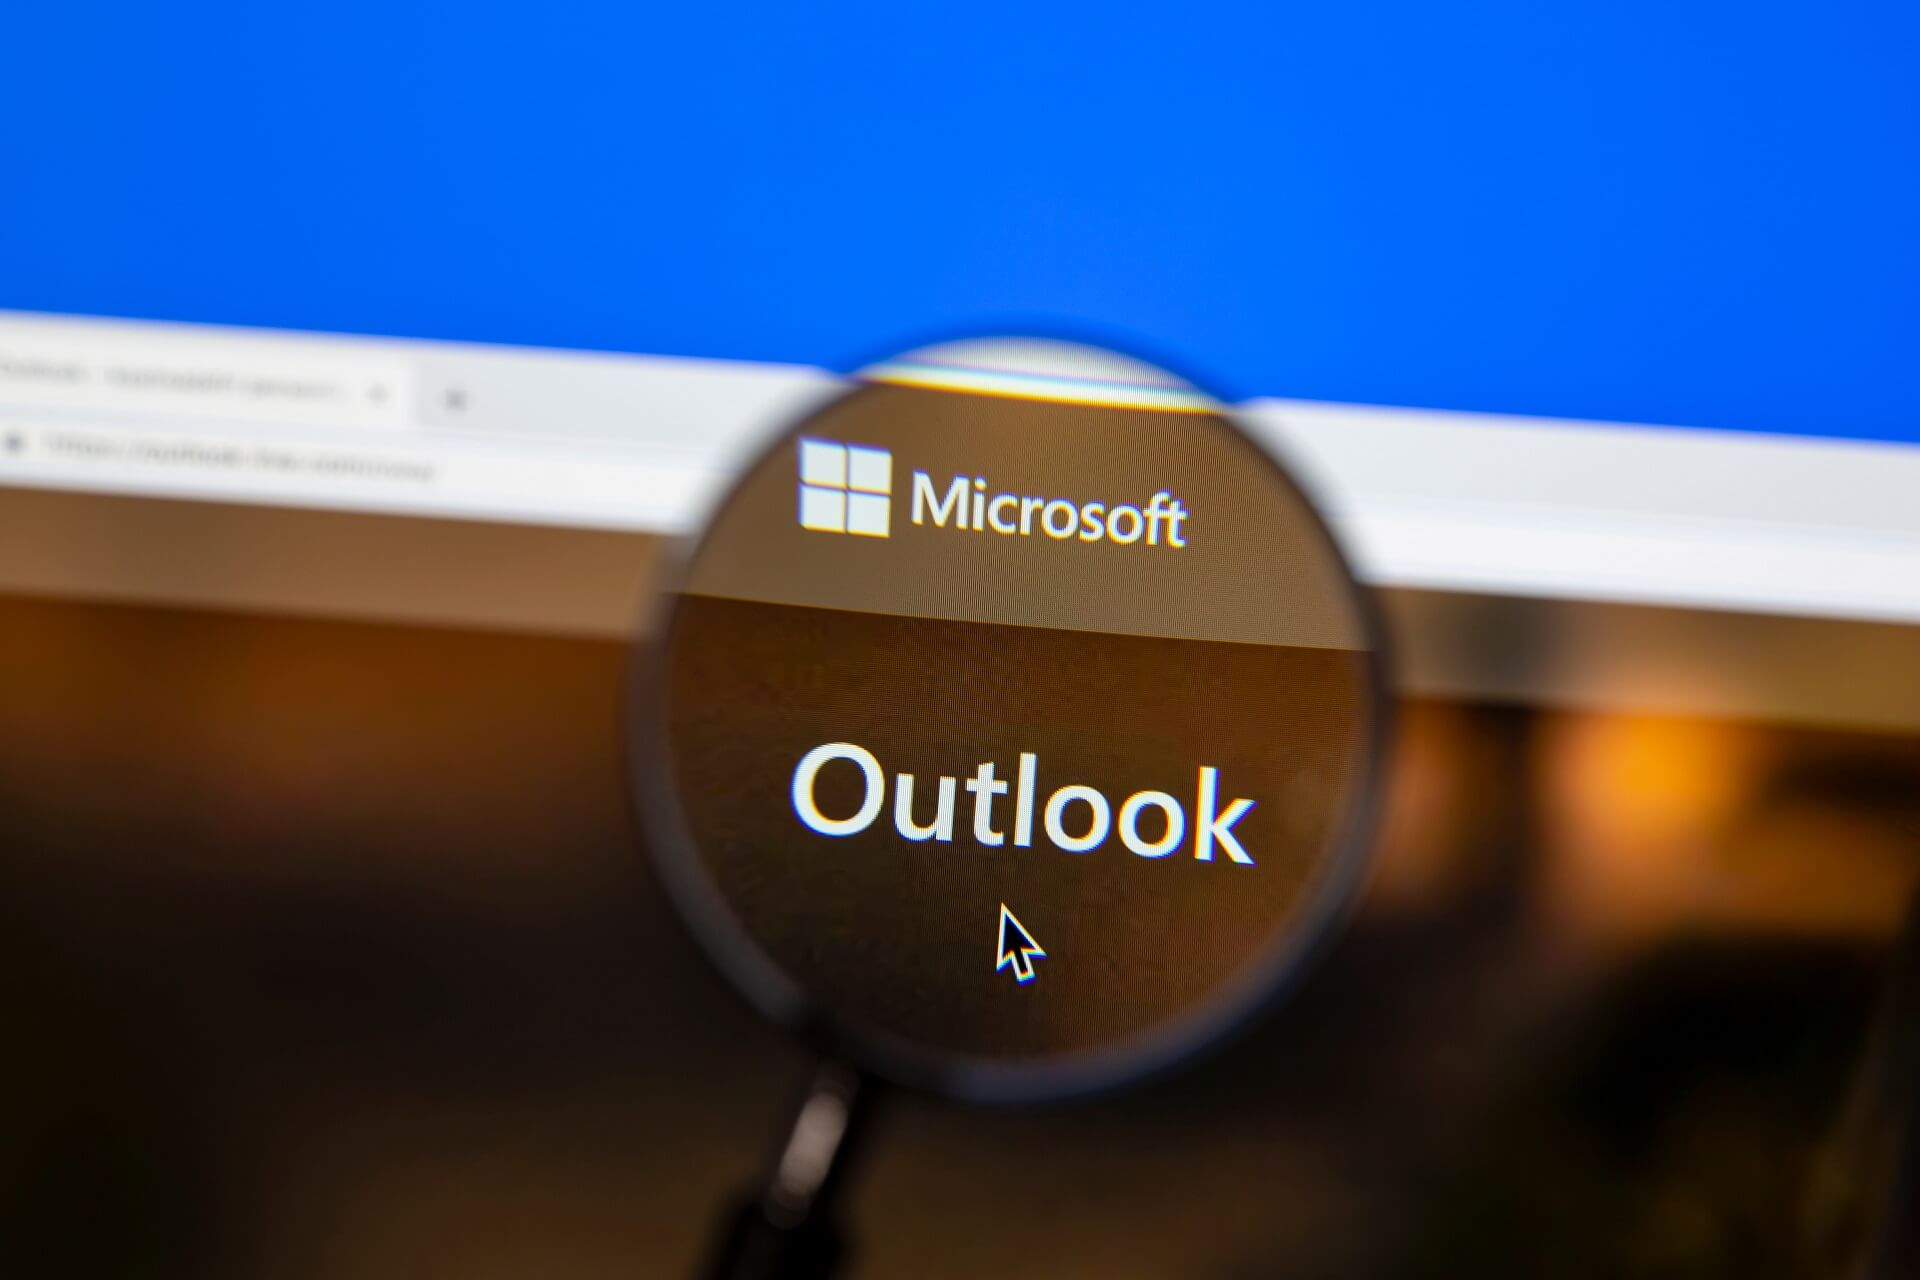 Outlook will reopen emails after restart